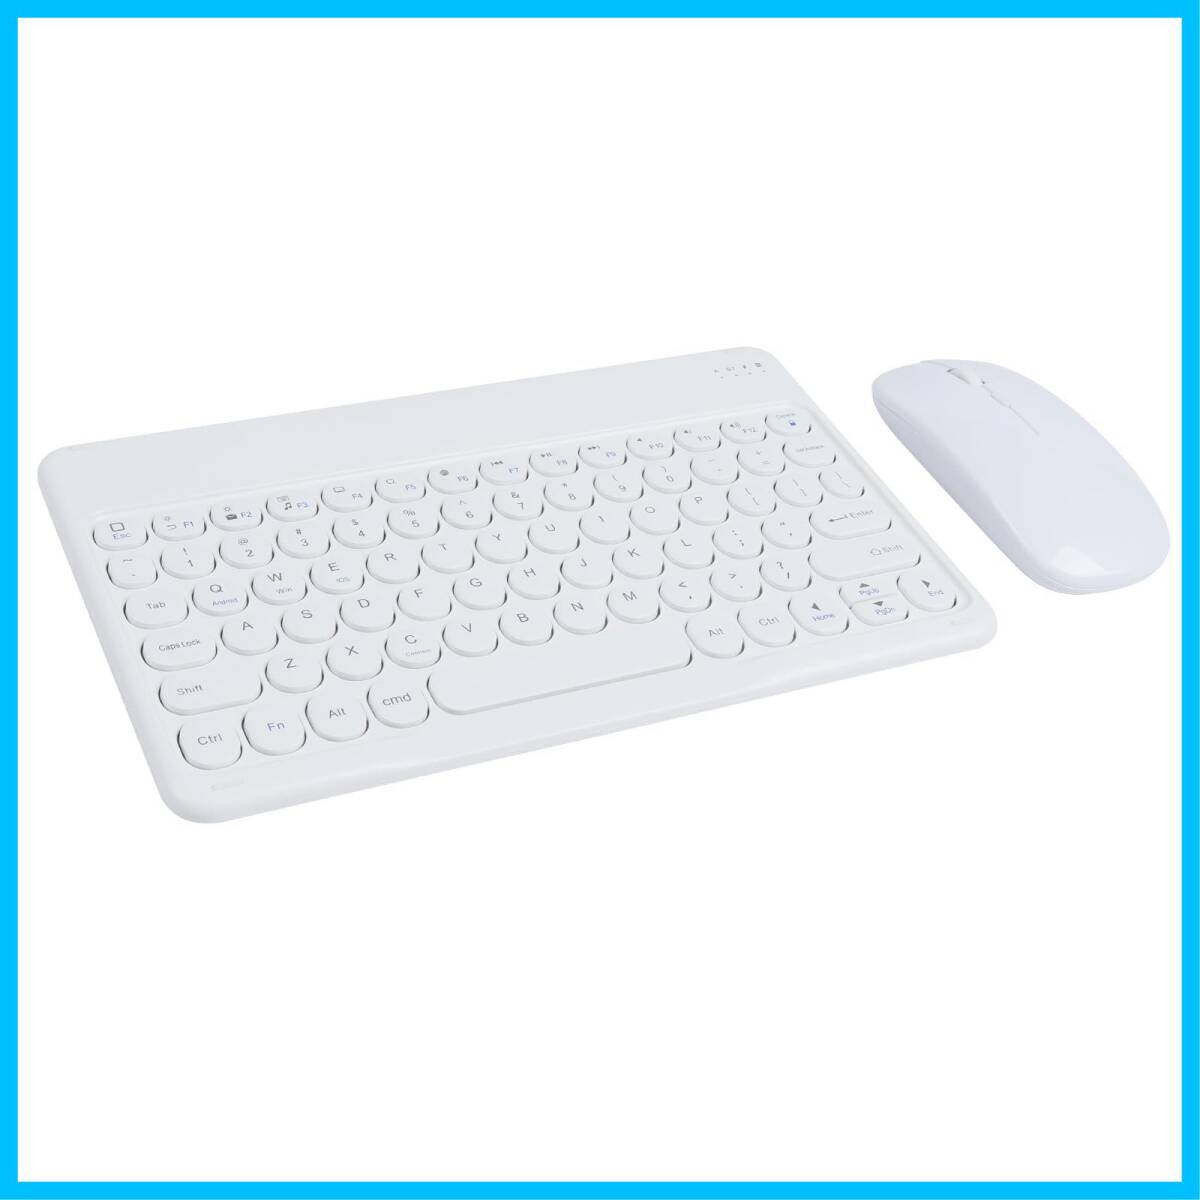 [ new arrivals commodity ] light weight mobile convenience thin type Windows compact pretty Mac rechargeable iOS wireless key board 10 -inch A